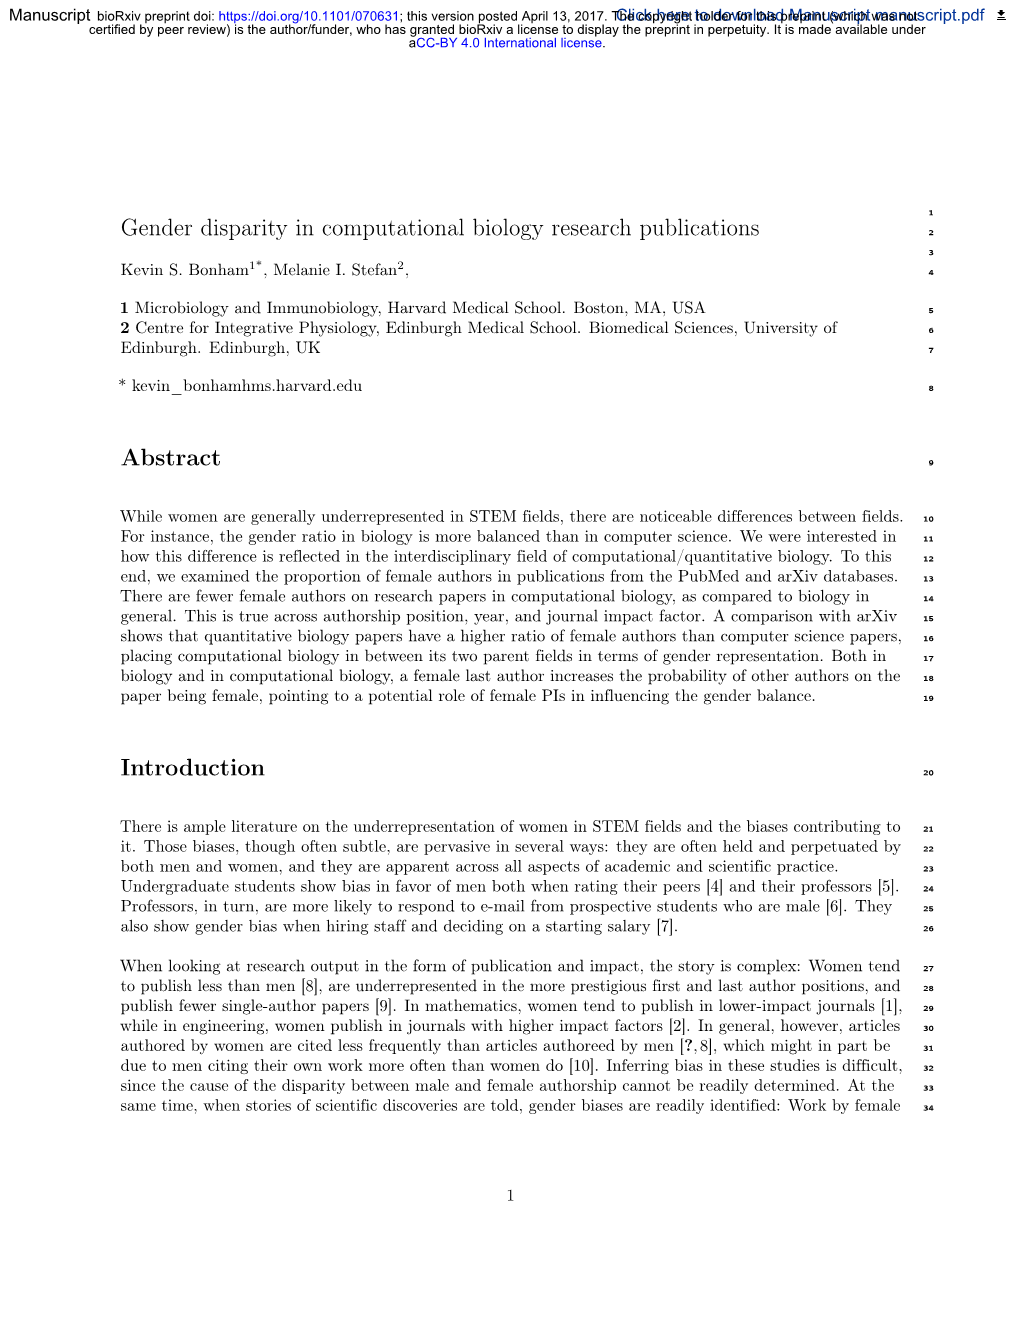 Gender Disparity in Computational Biology Research Publications 2